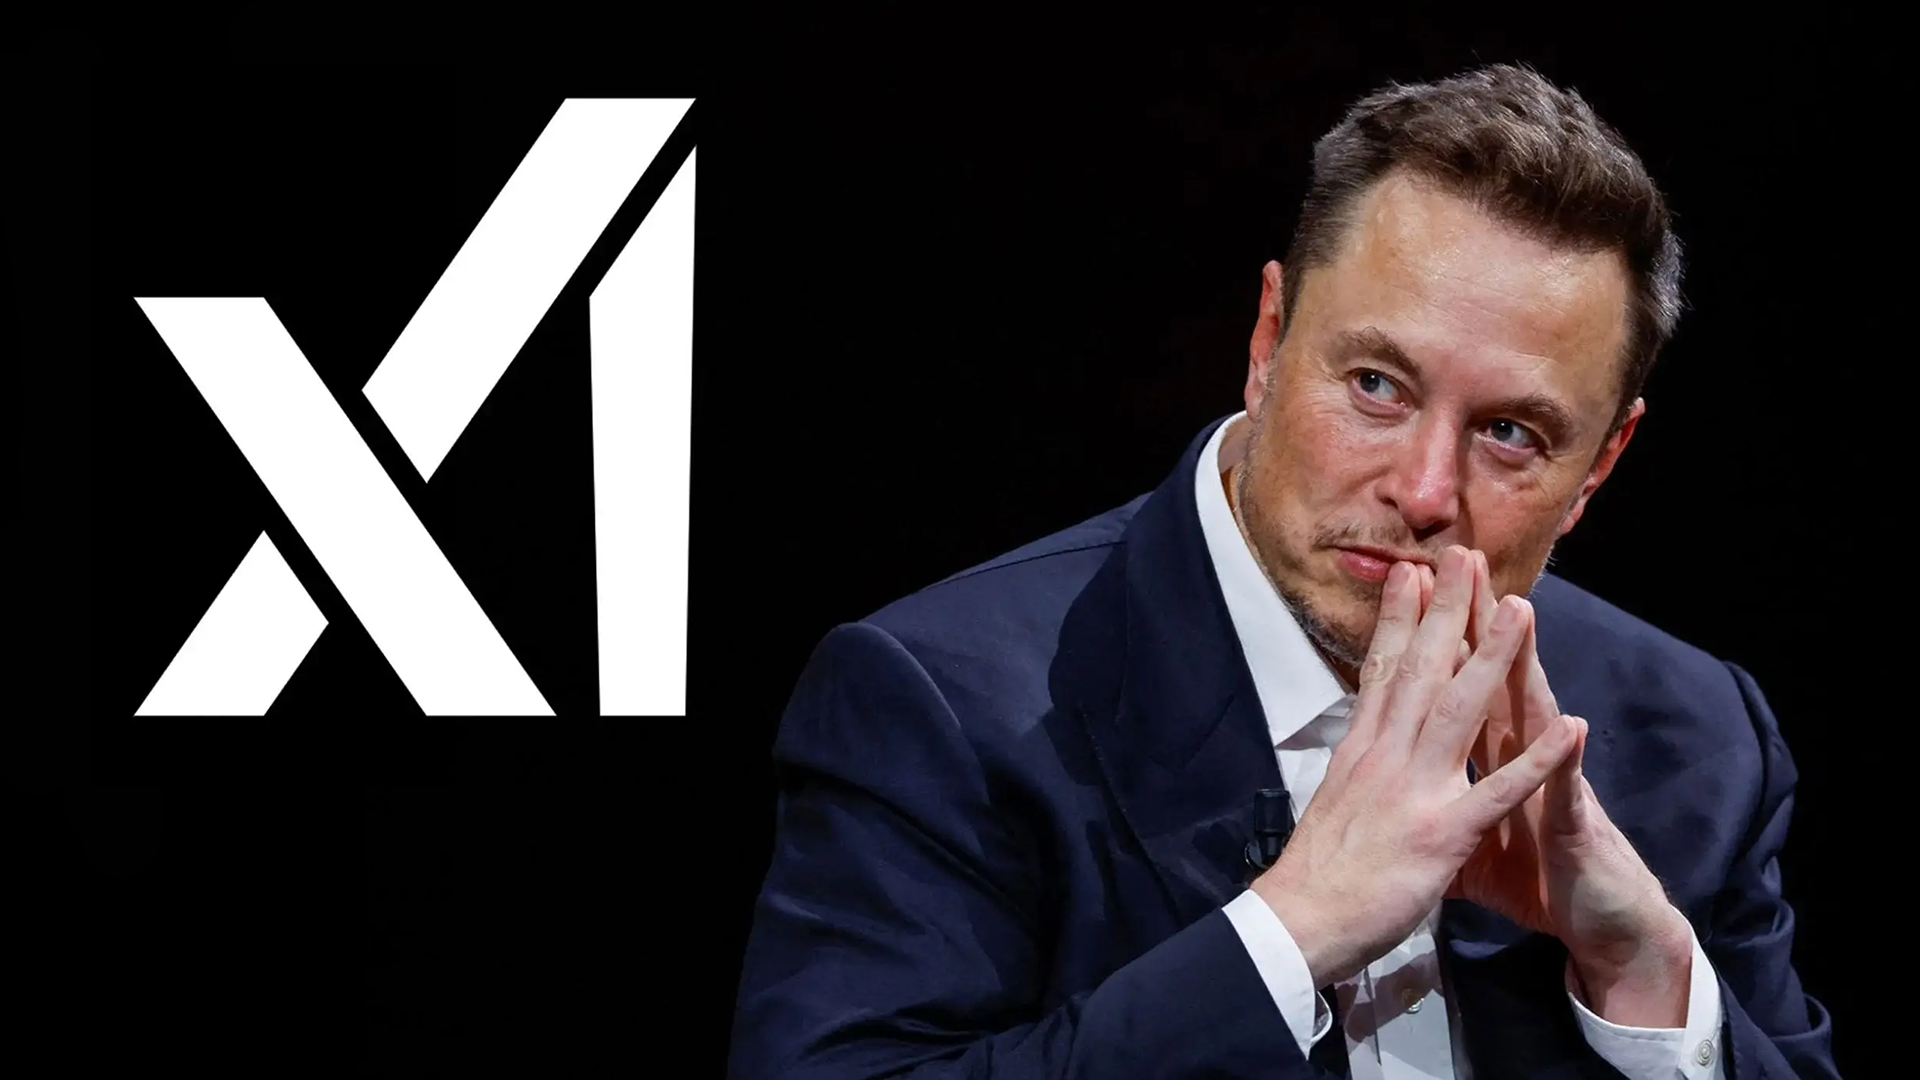 Elon Musk announced the artificial intelligence chatbot "Grok". Stating that the chatbot will also be integrated into the social media platform X, Musk also listed the features that distinguish Grok from other artificial intelligence products.